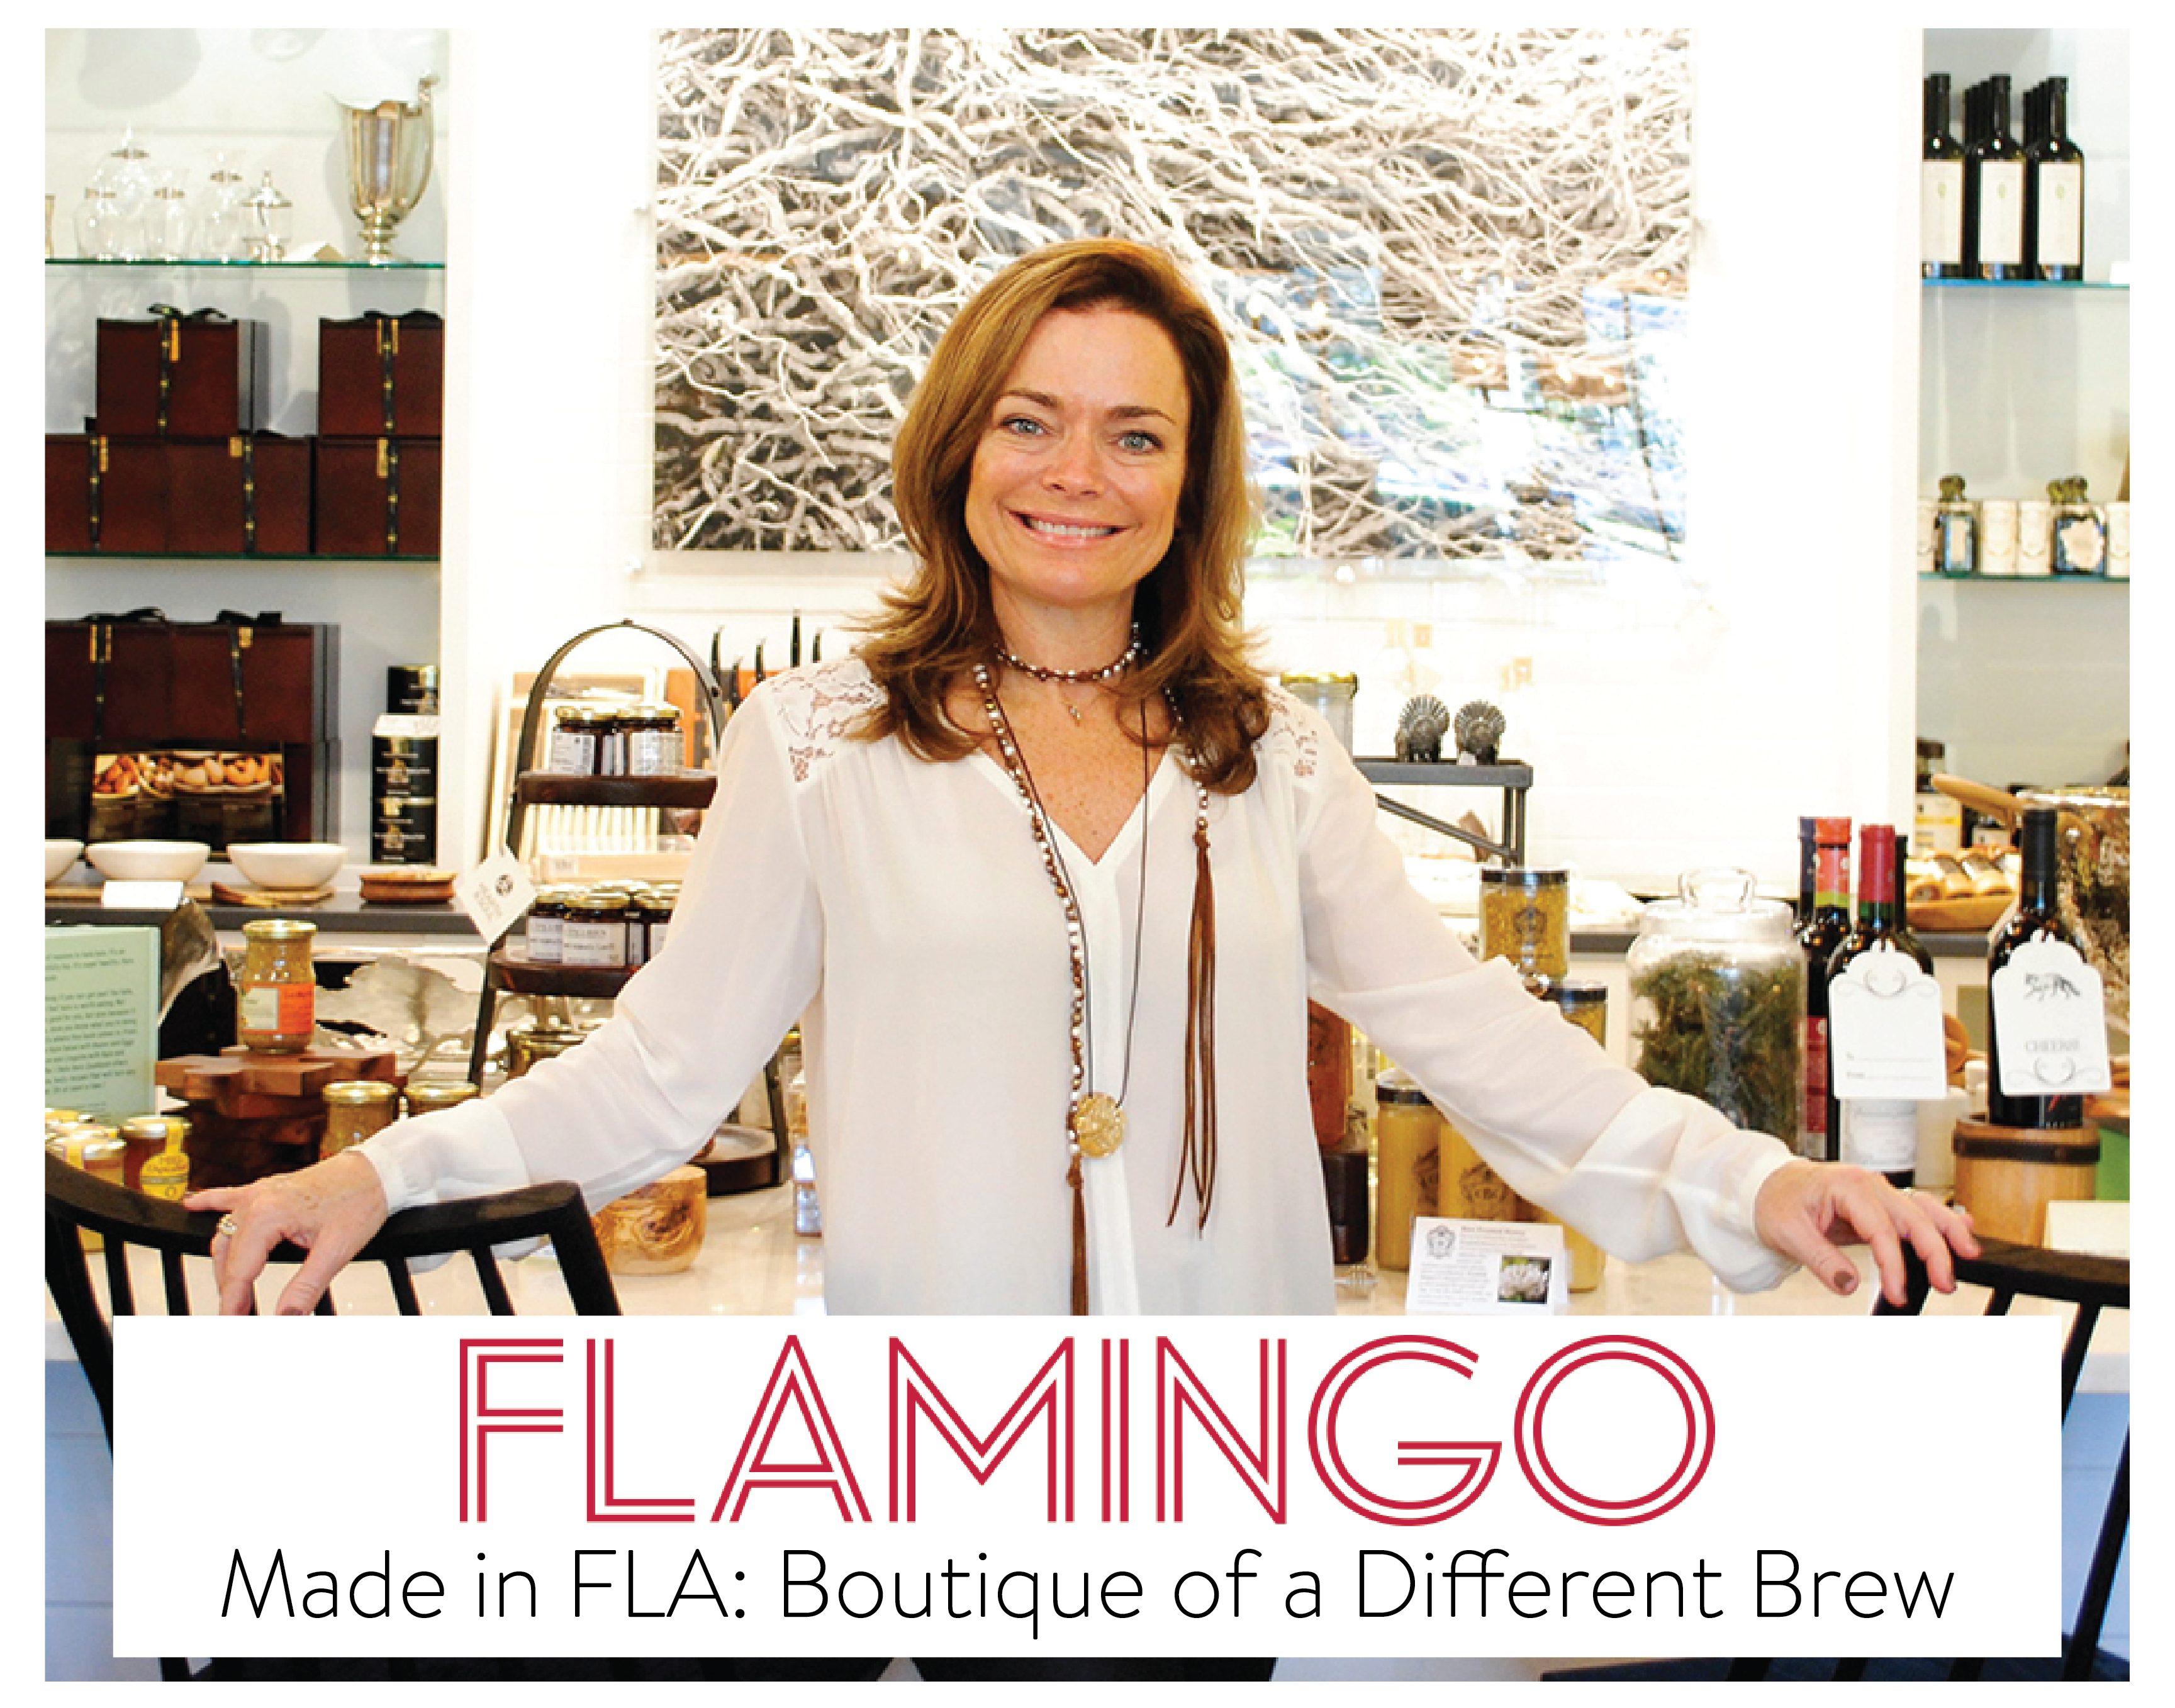 Flamingo Magazine | Made in Florida | A Boutique of a Different Brew | Hearth and Soul